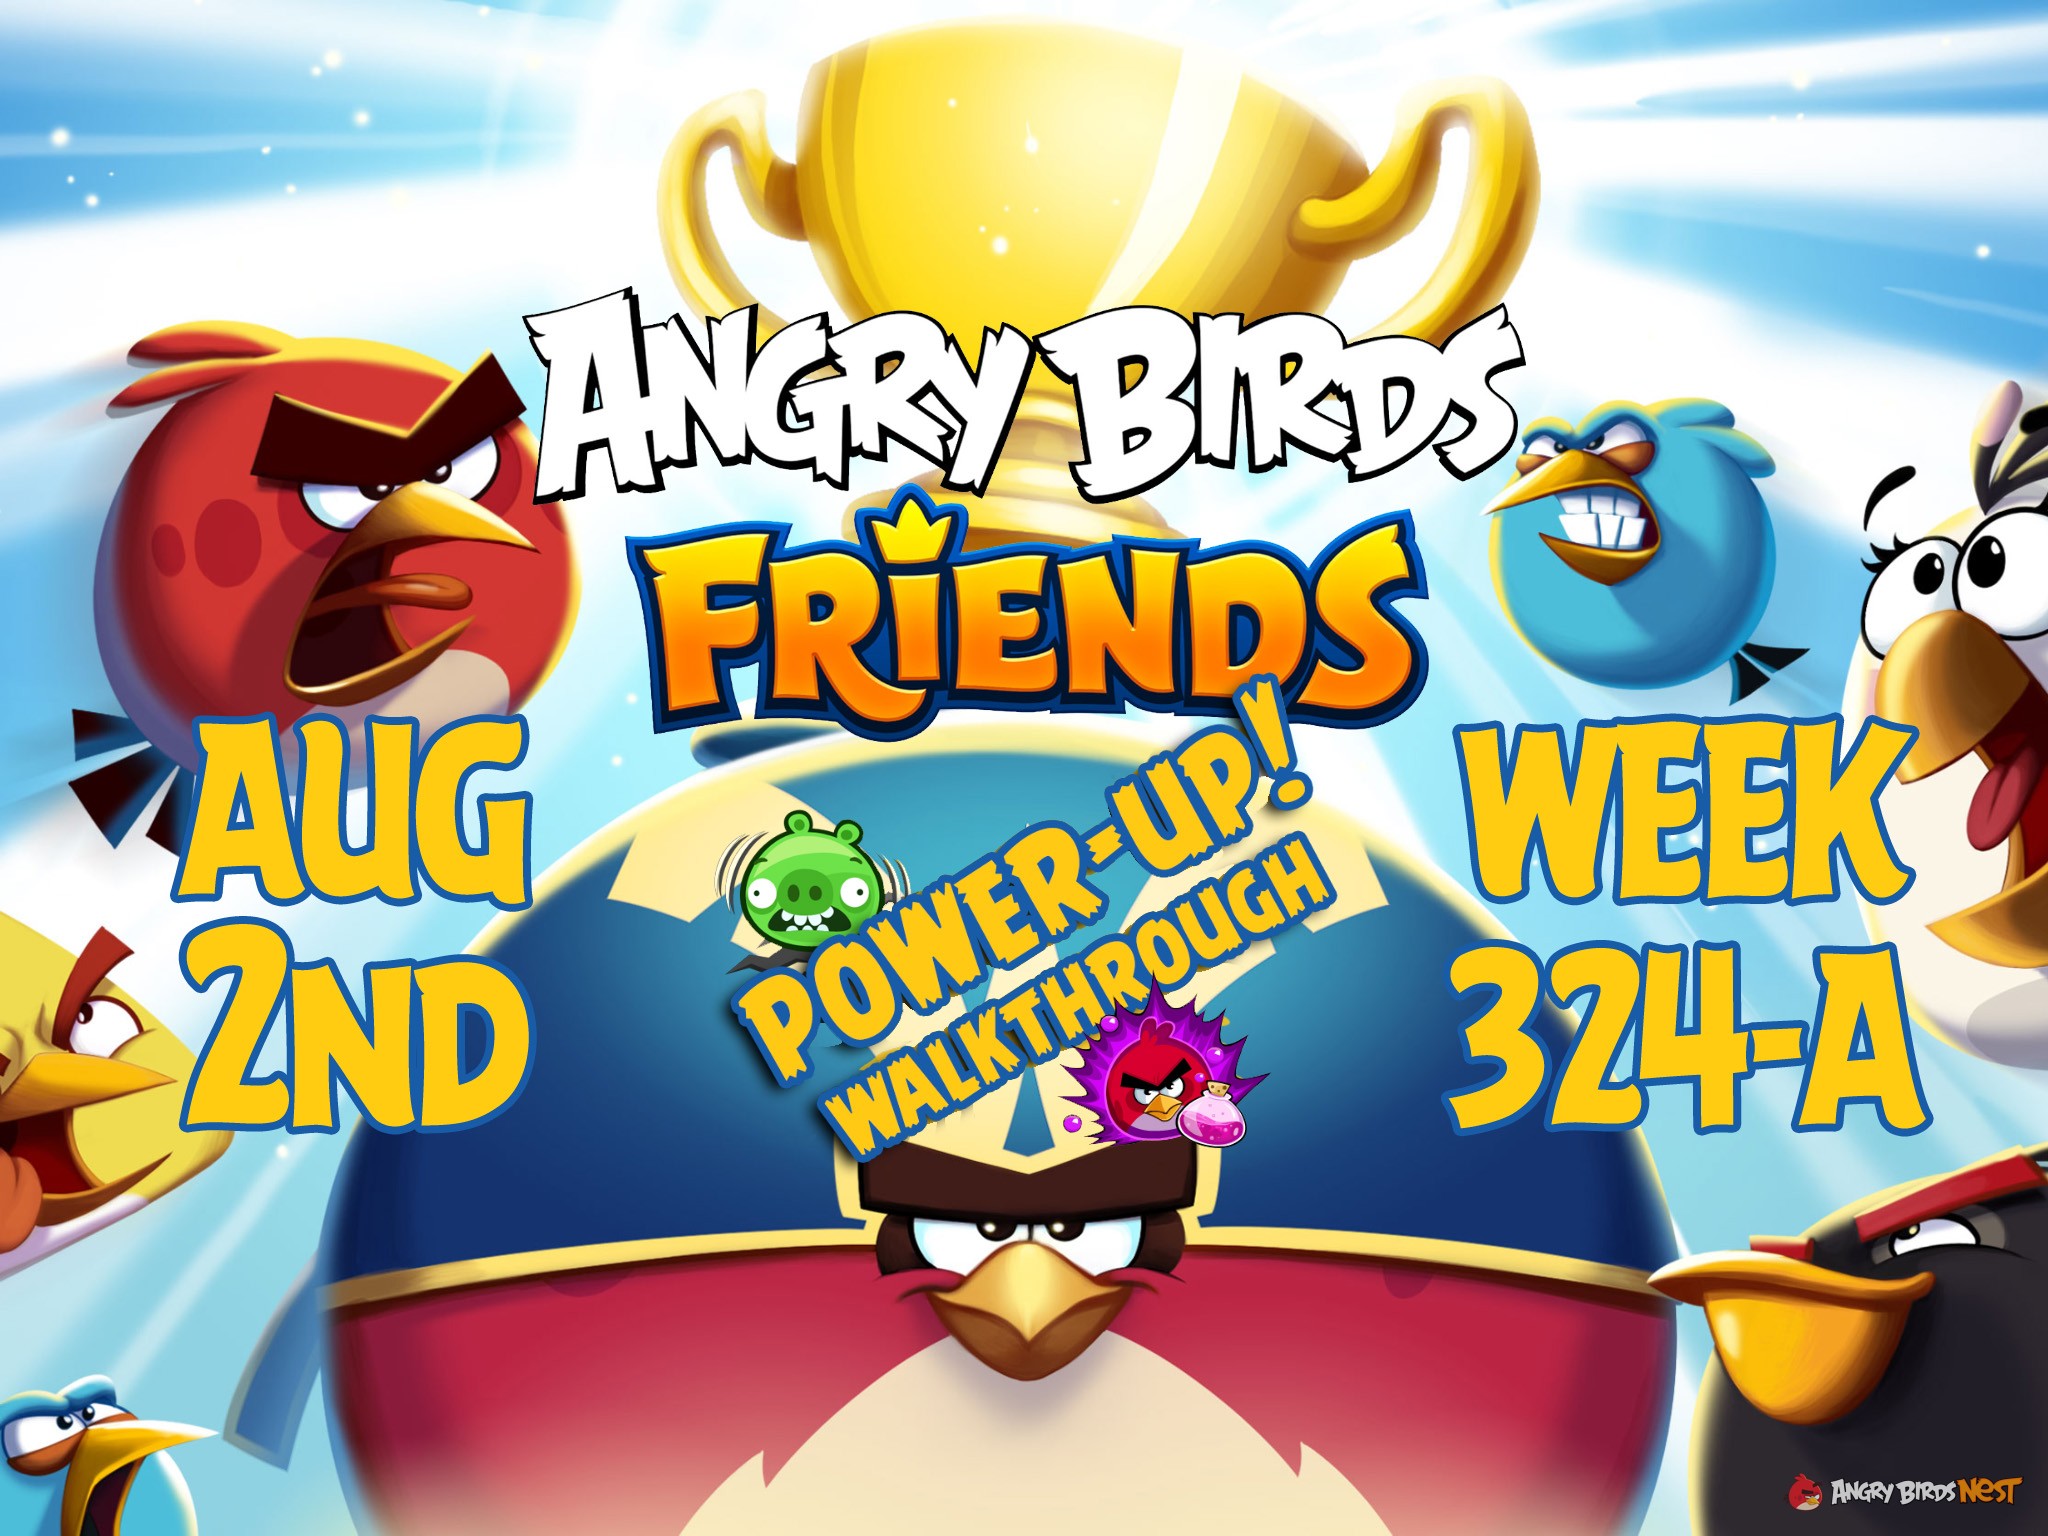 Angry-Birds-Friends-Tournament-Week-324-A-Feature-Image-PU